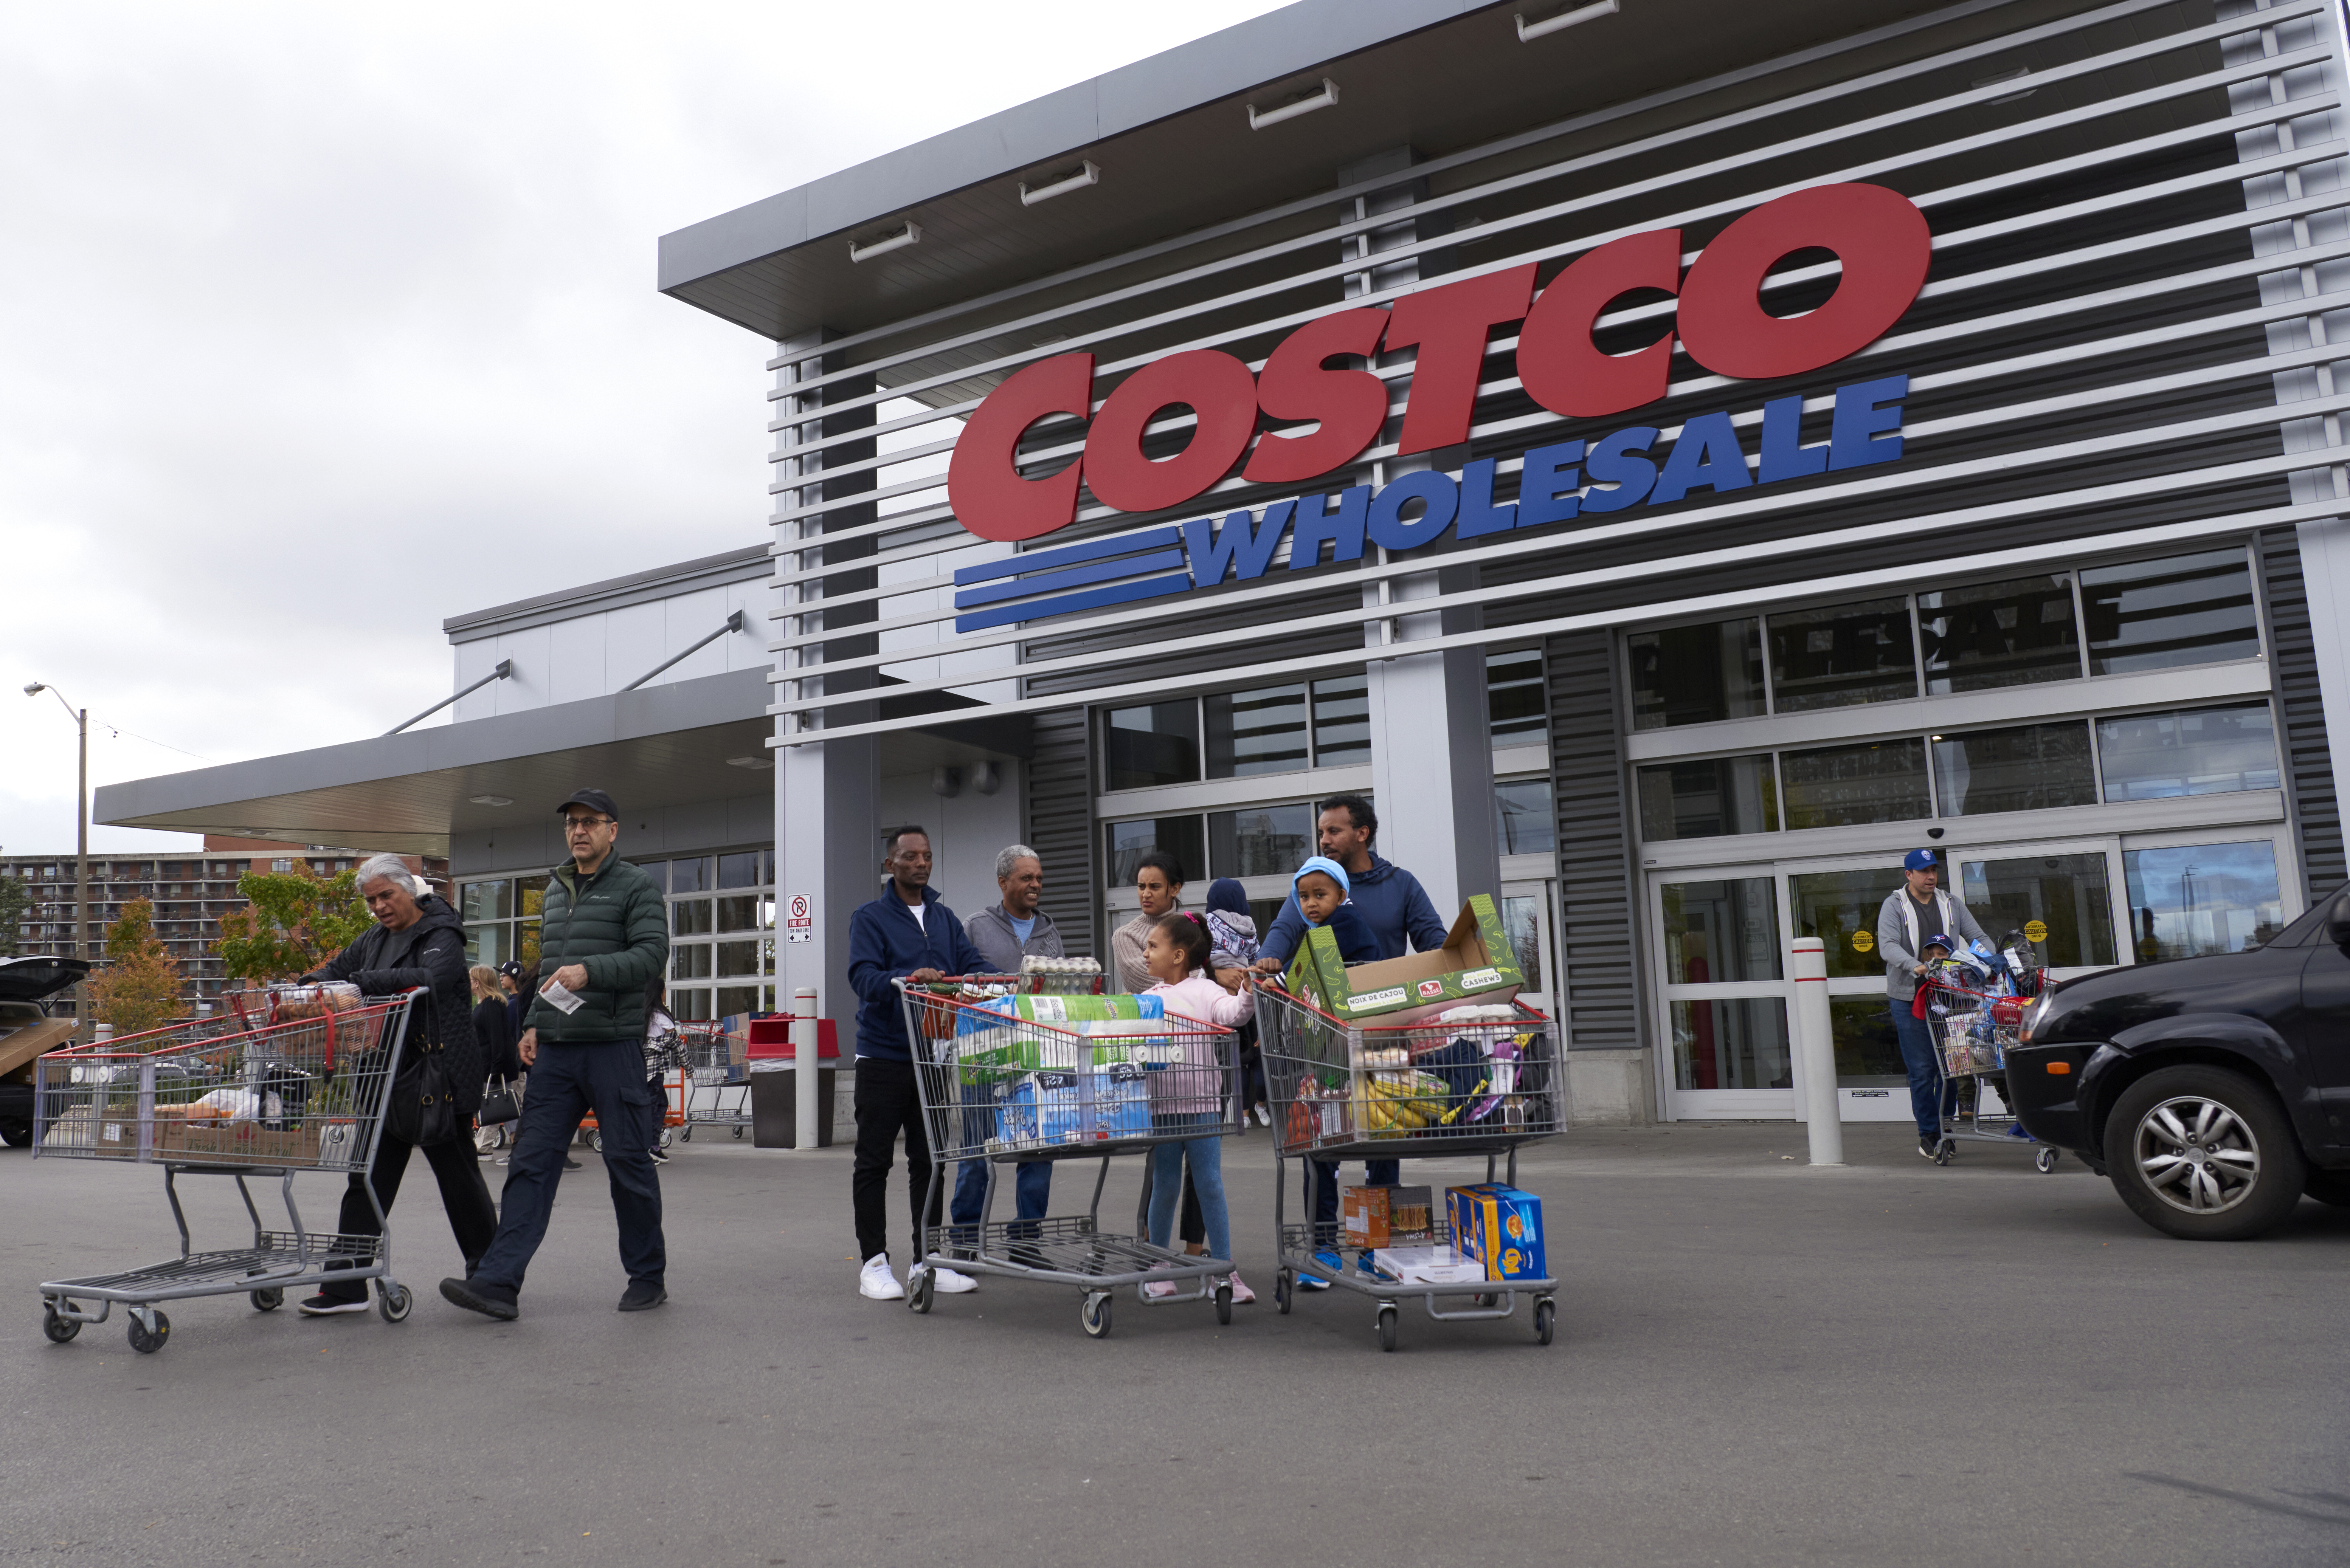 Costco open to grocery code of conduct, but says it must apply to all